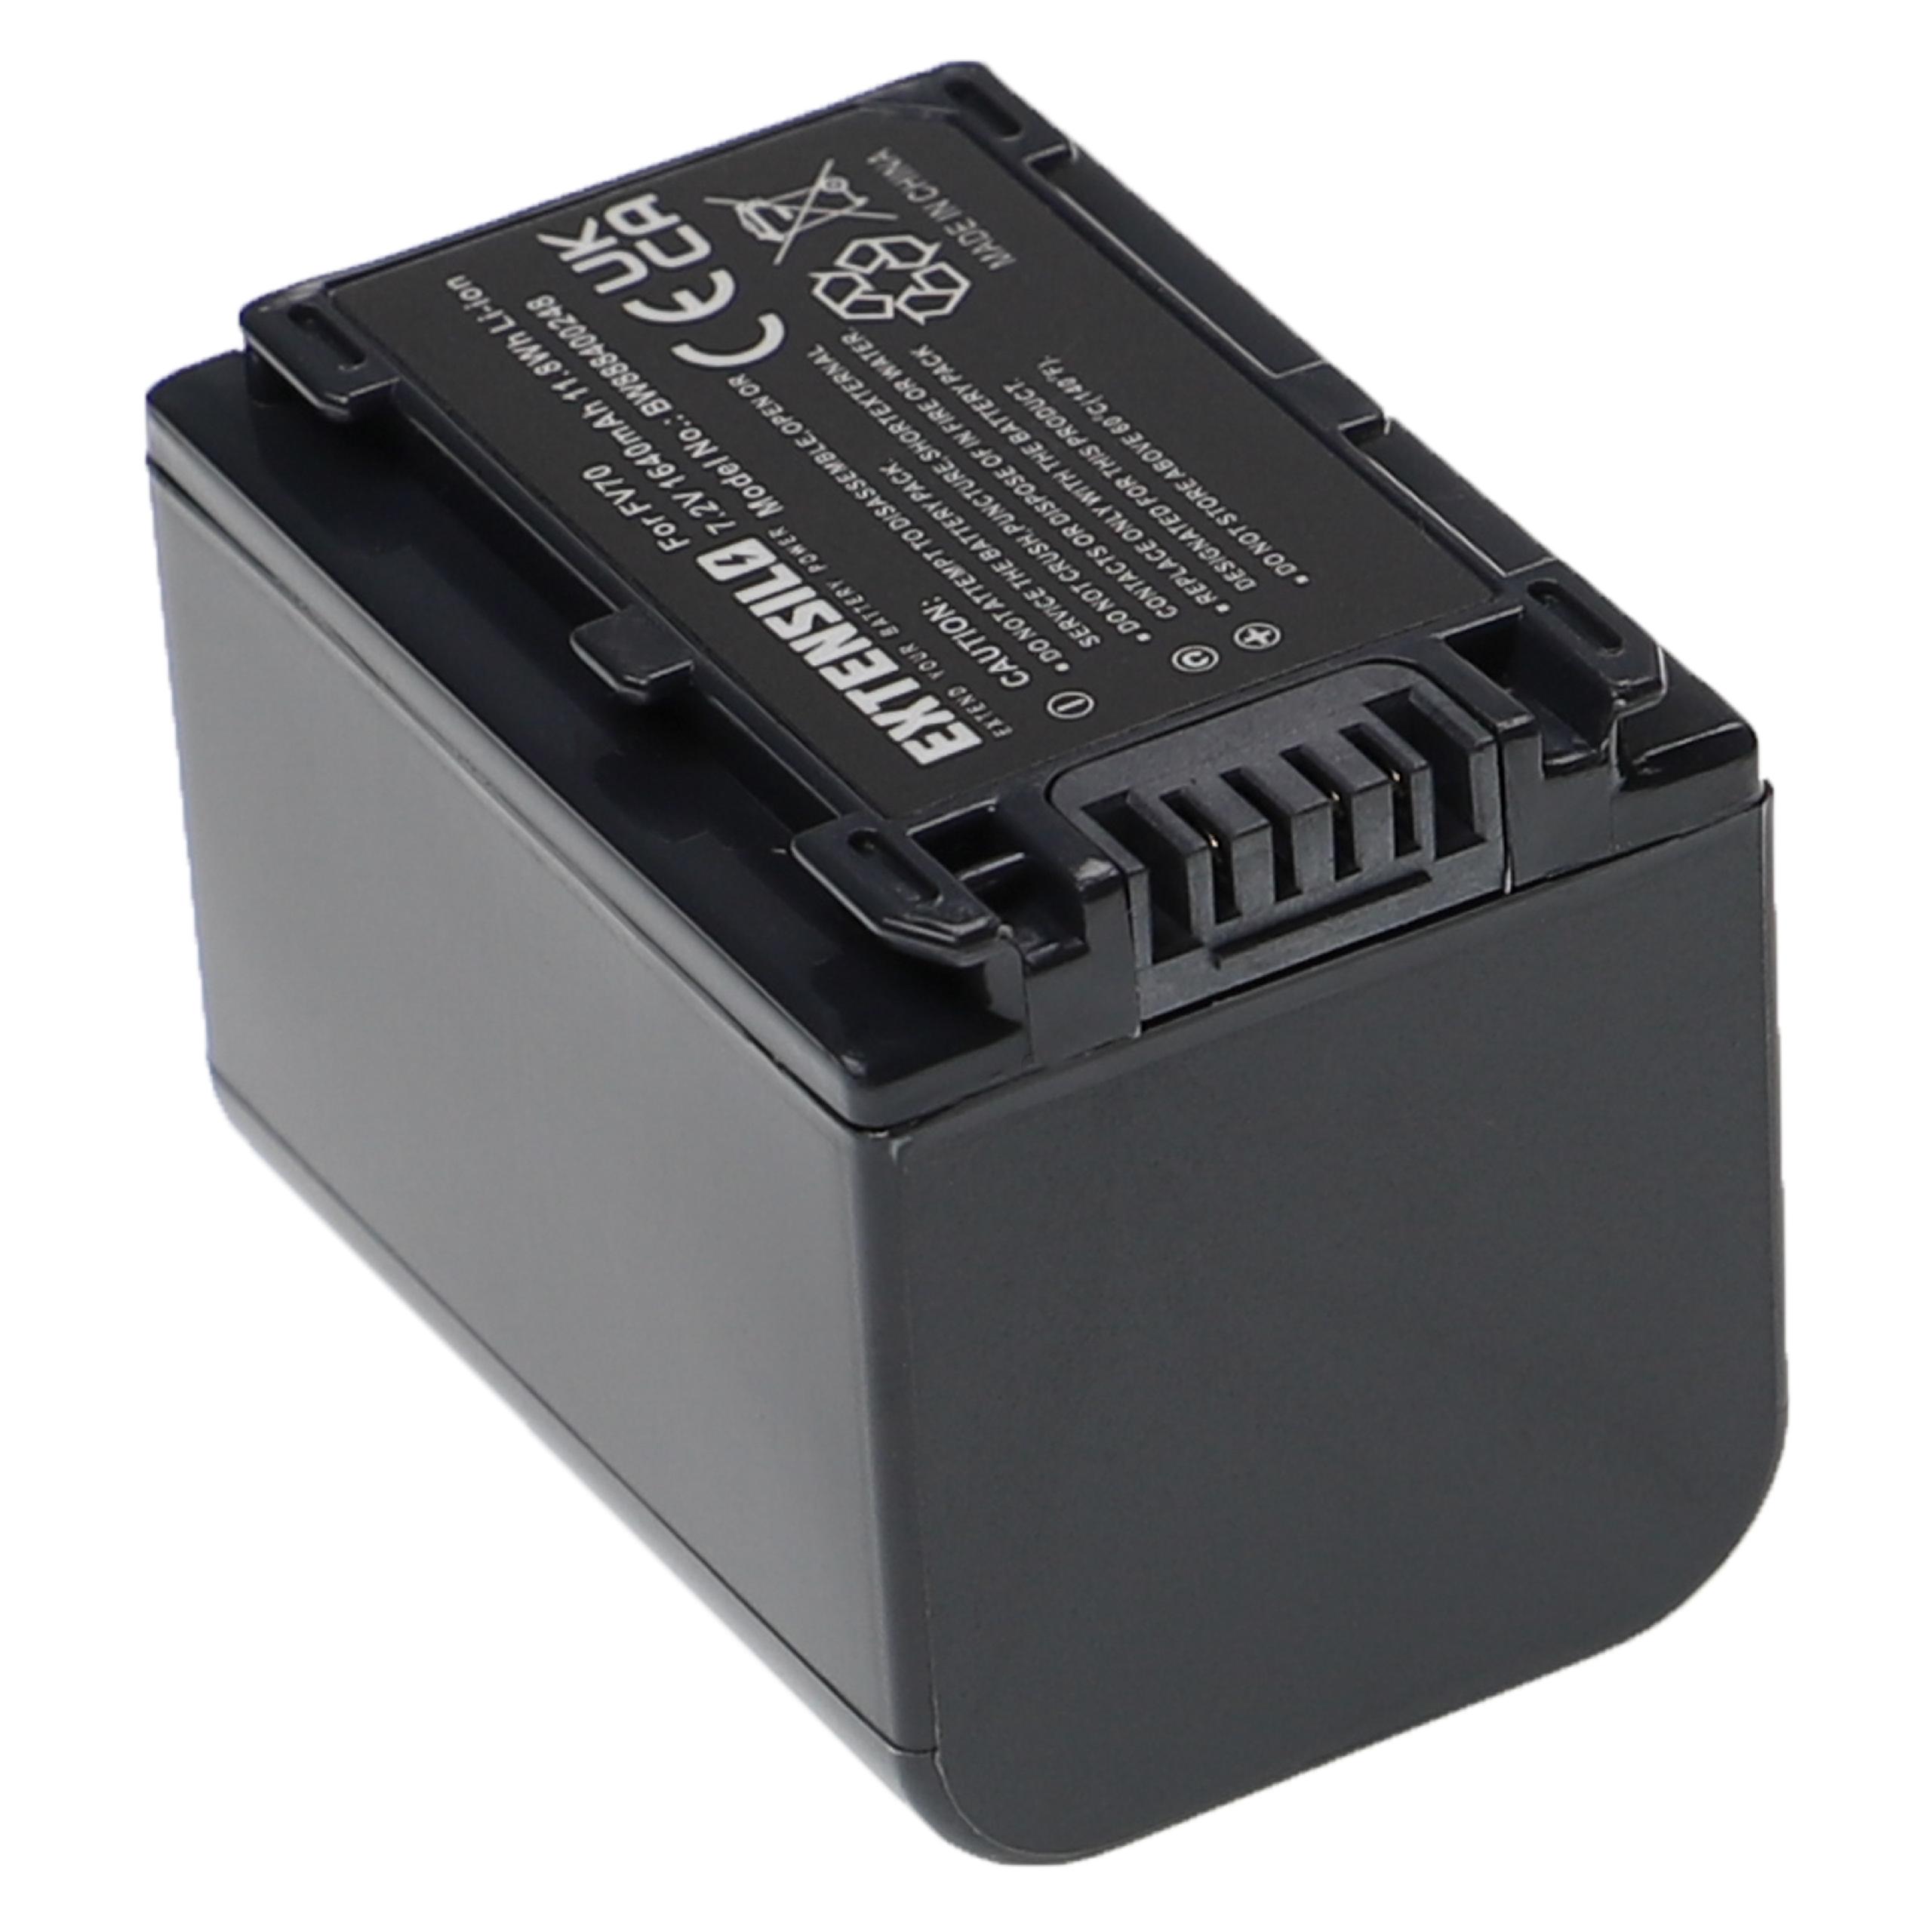 Battery Replacement for Sony NP-FH100, NP-FH50, NP-FV70, NP-FV50, NP-FH71, NP-FV100 - 1640mAh, 7.2V, Li-Ion